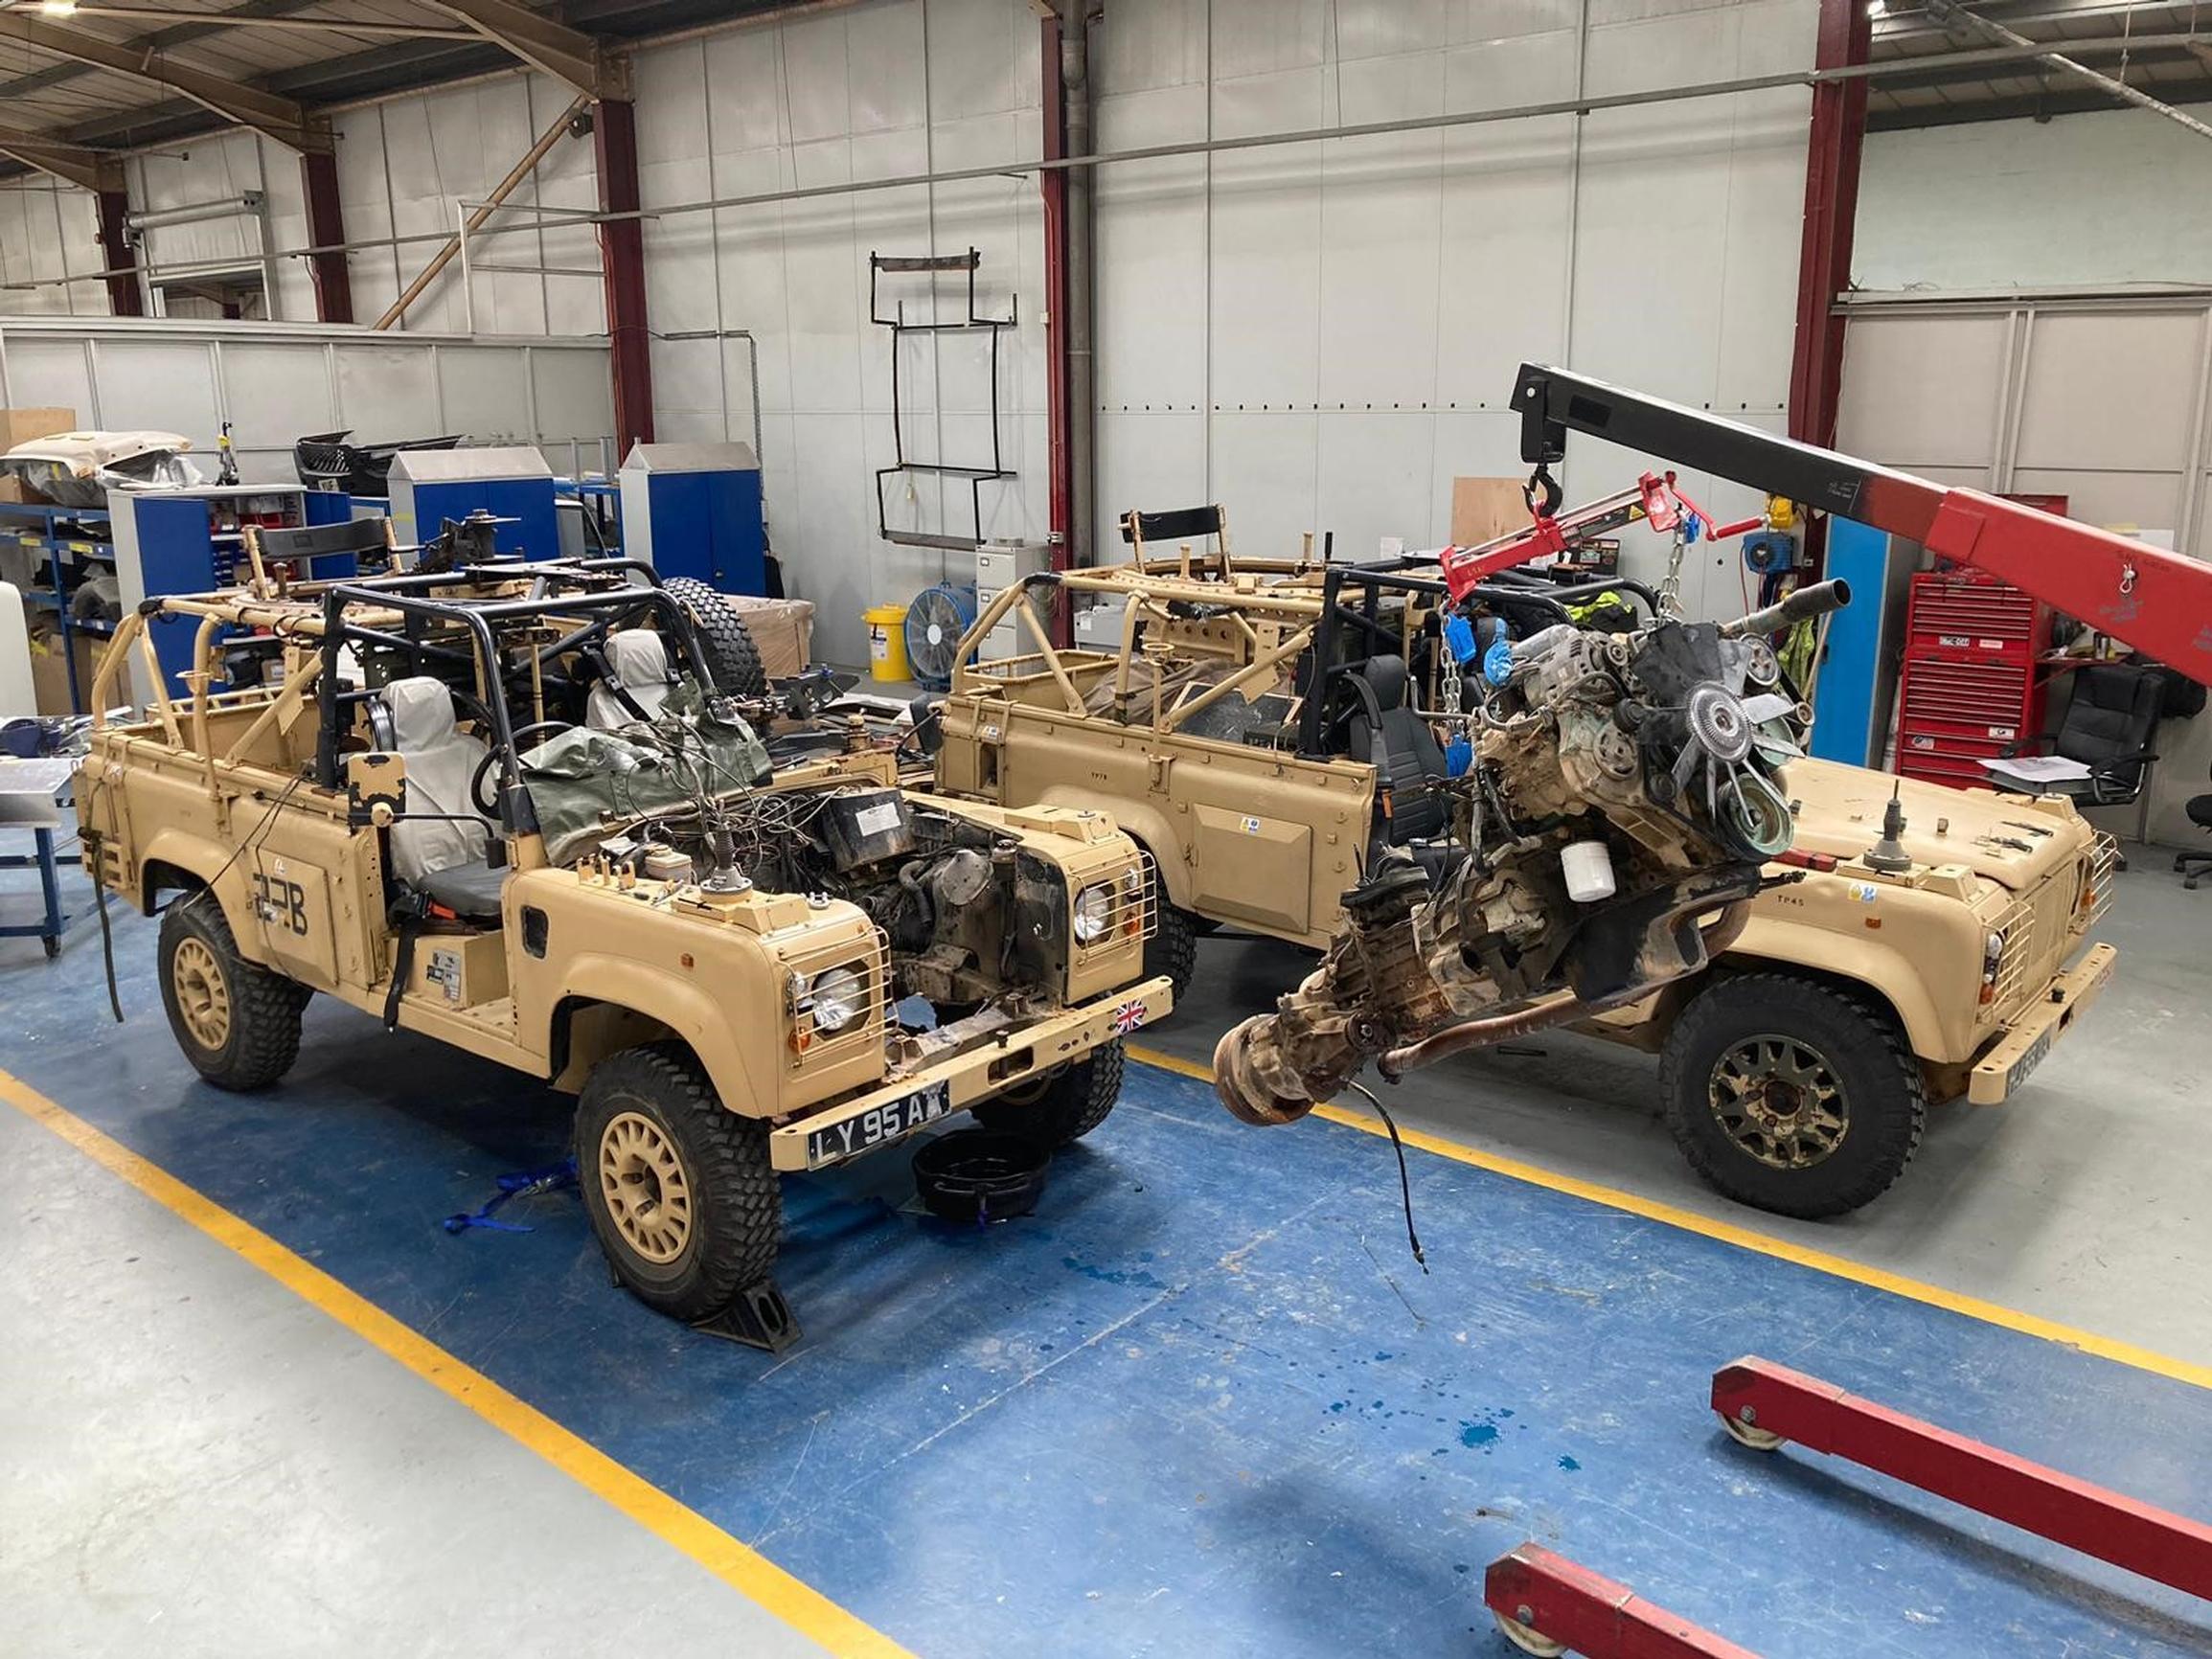 Land Rovers converted to electric powertrains